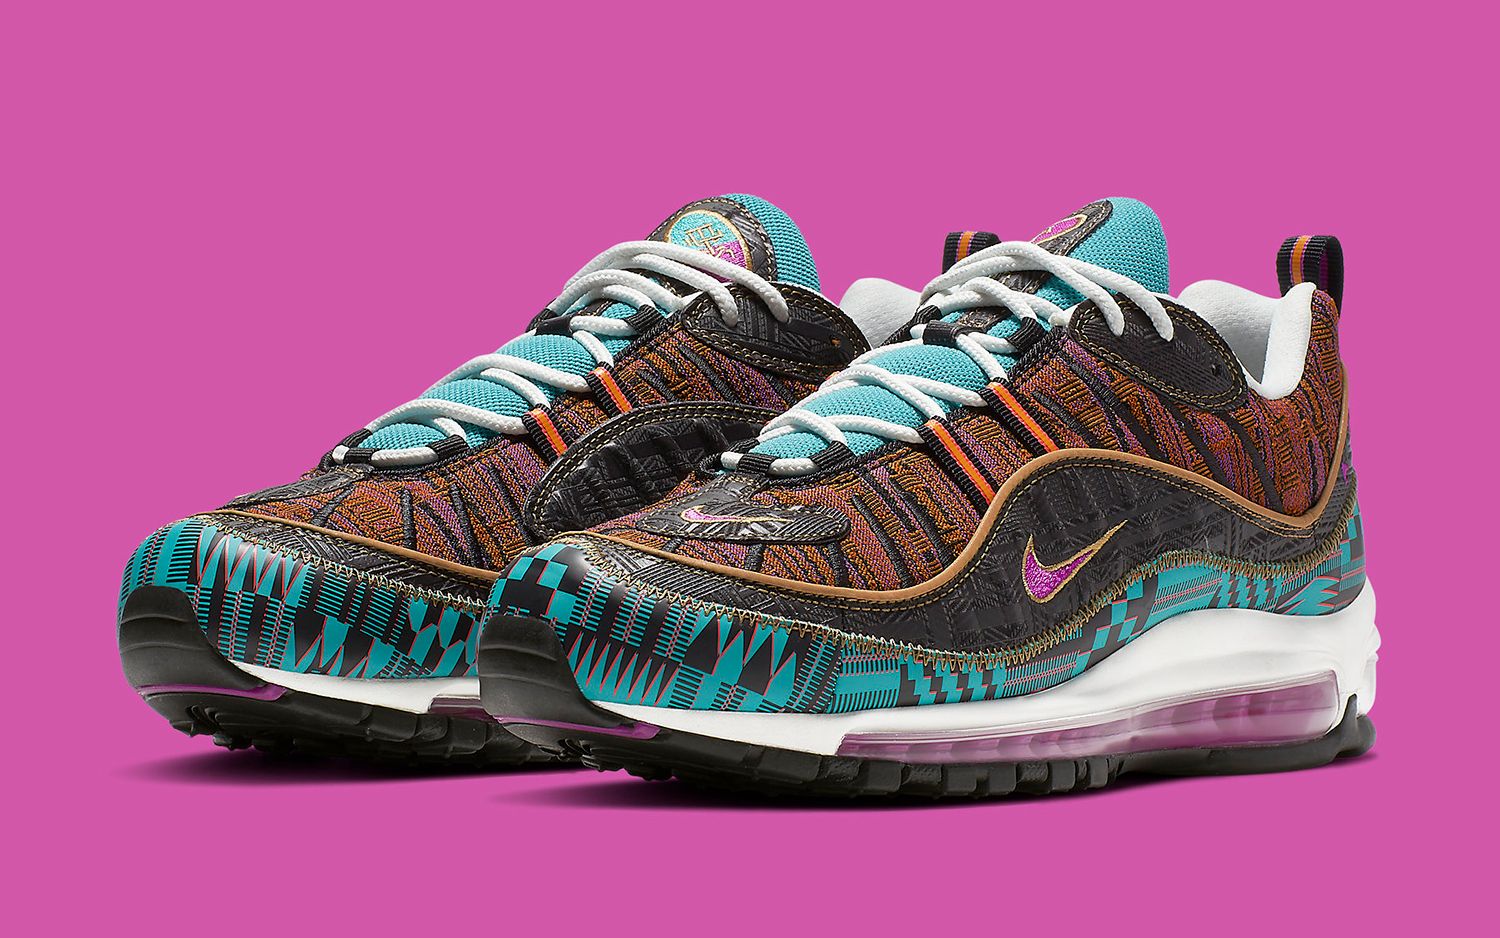 Stor Såkaldte Implement The Air Max 98 “BHM” is Finally Available! | House of Heat°